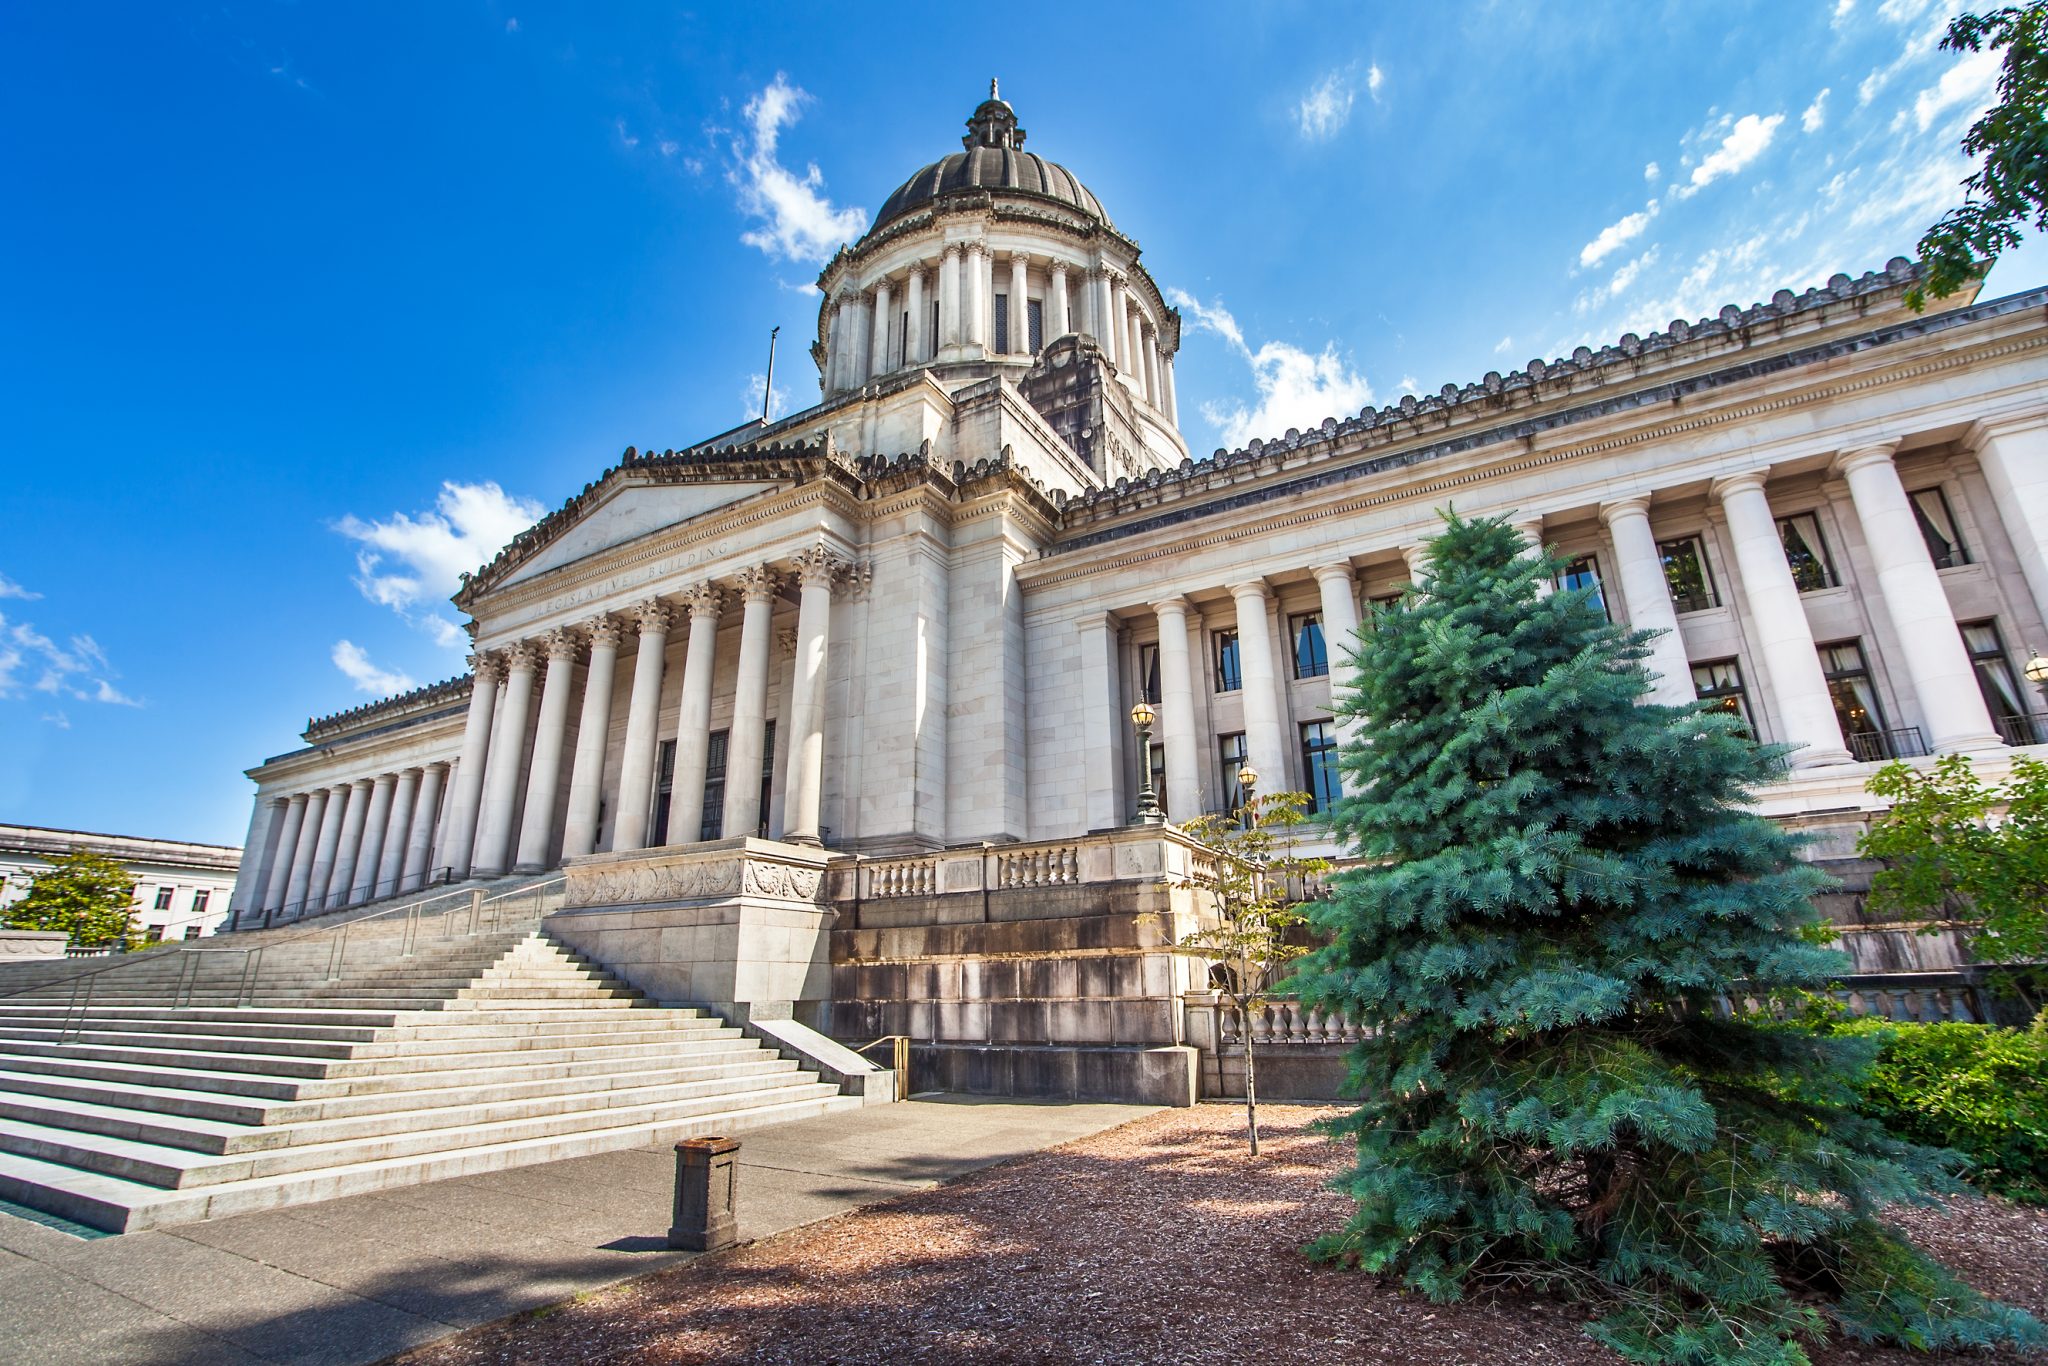 Washington State Capitol Olympia to illustrate Gun Background Check Process, Rules, and Updates